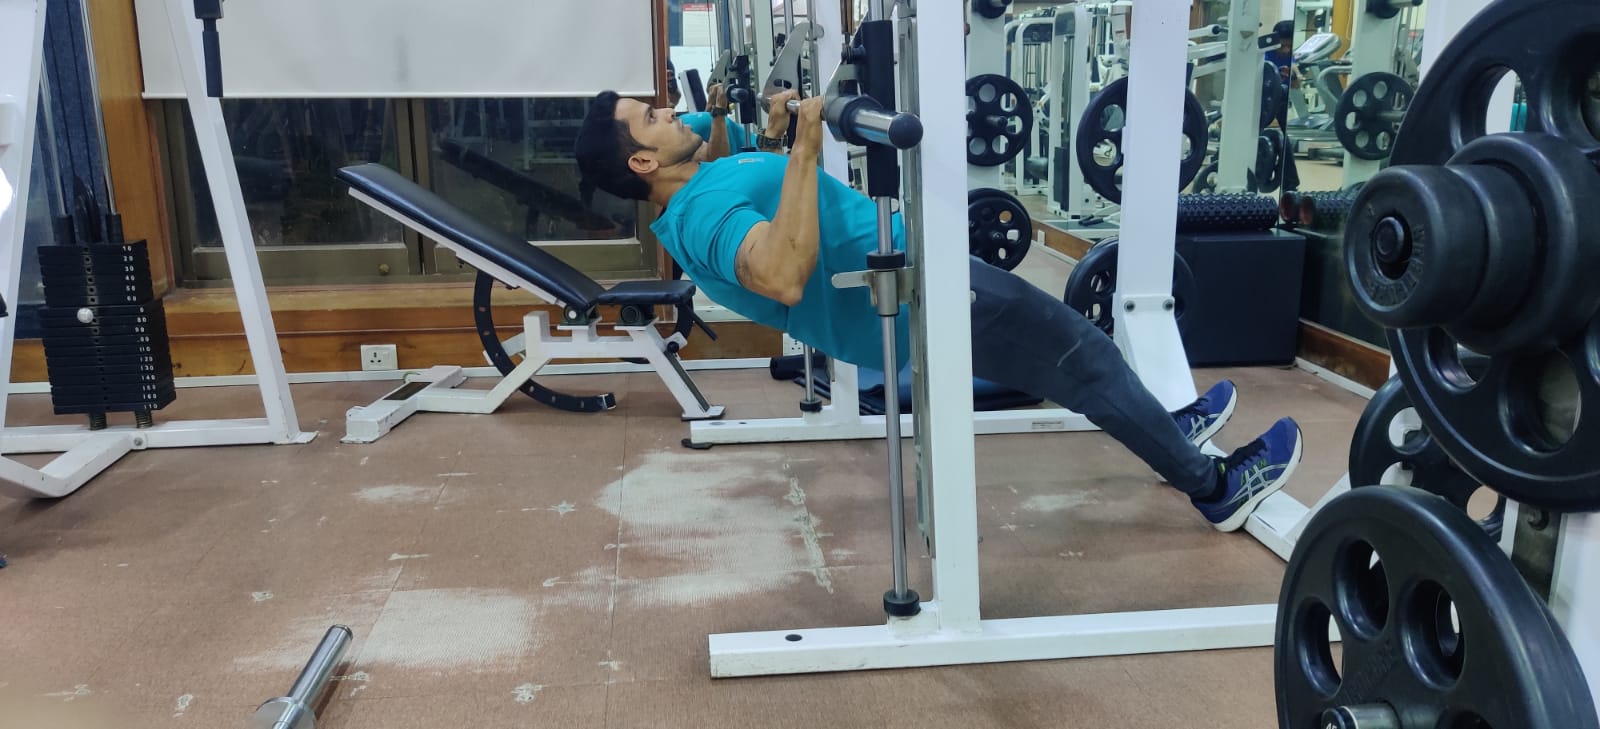 Tips to Improve Your Bench Press  EREPS the European Register of Exercise  Professionals